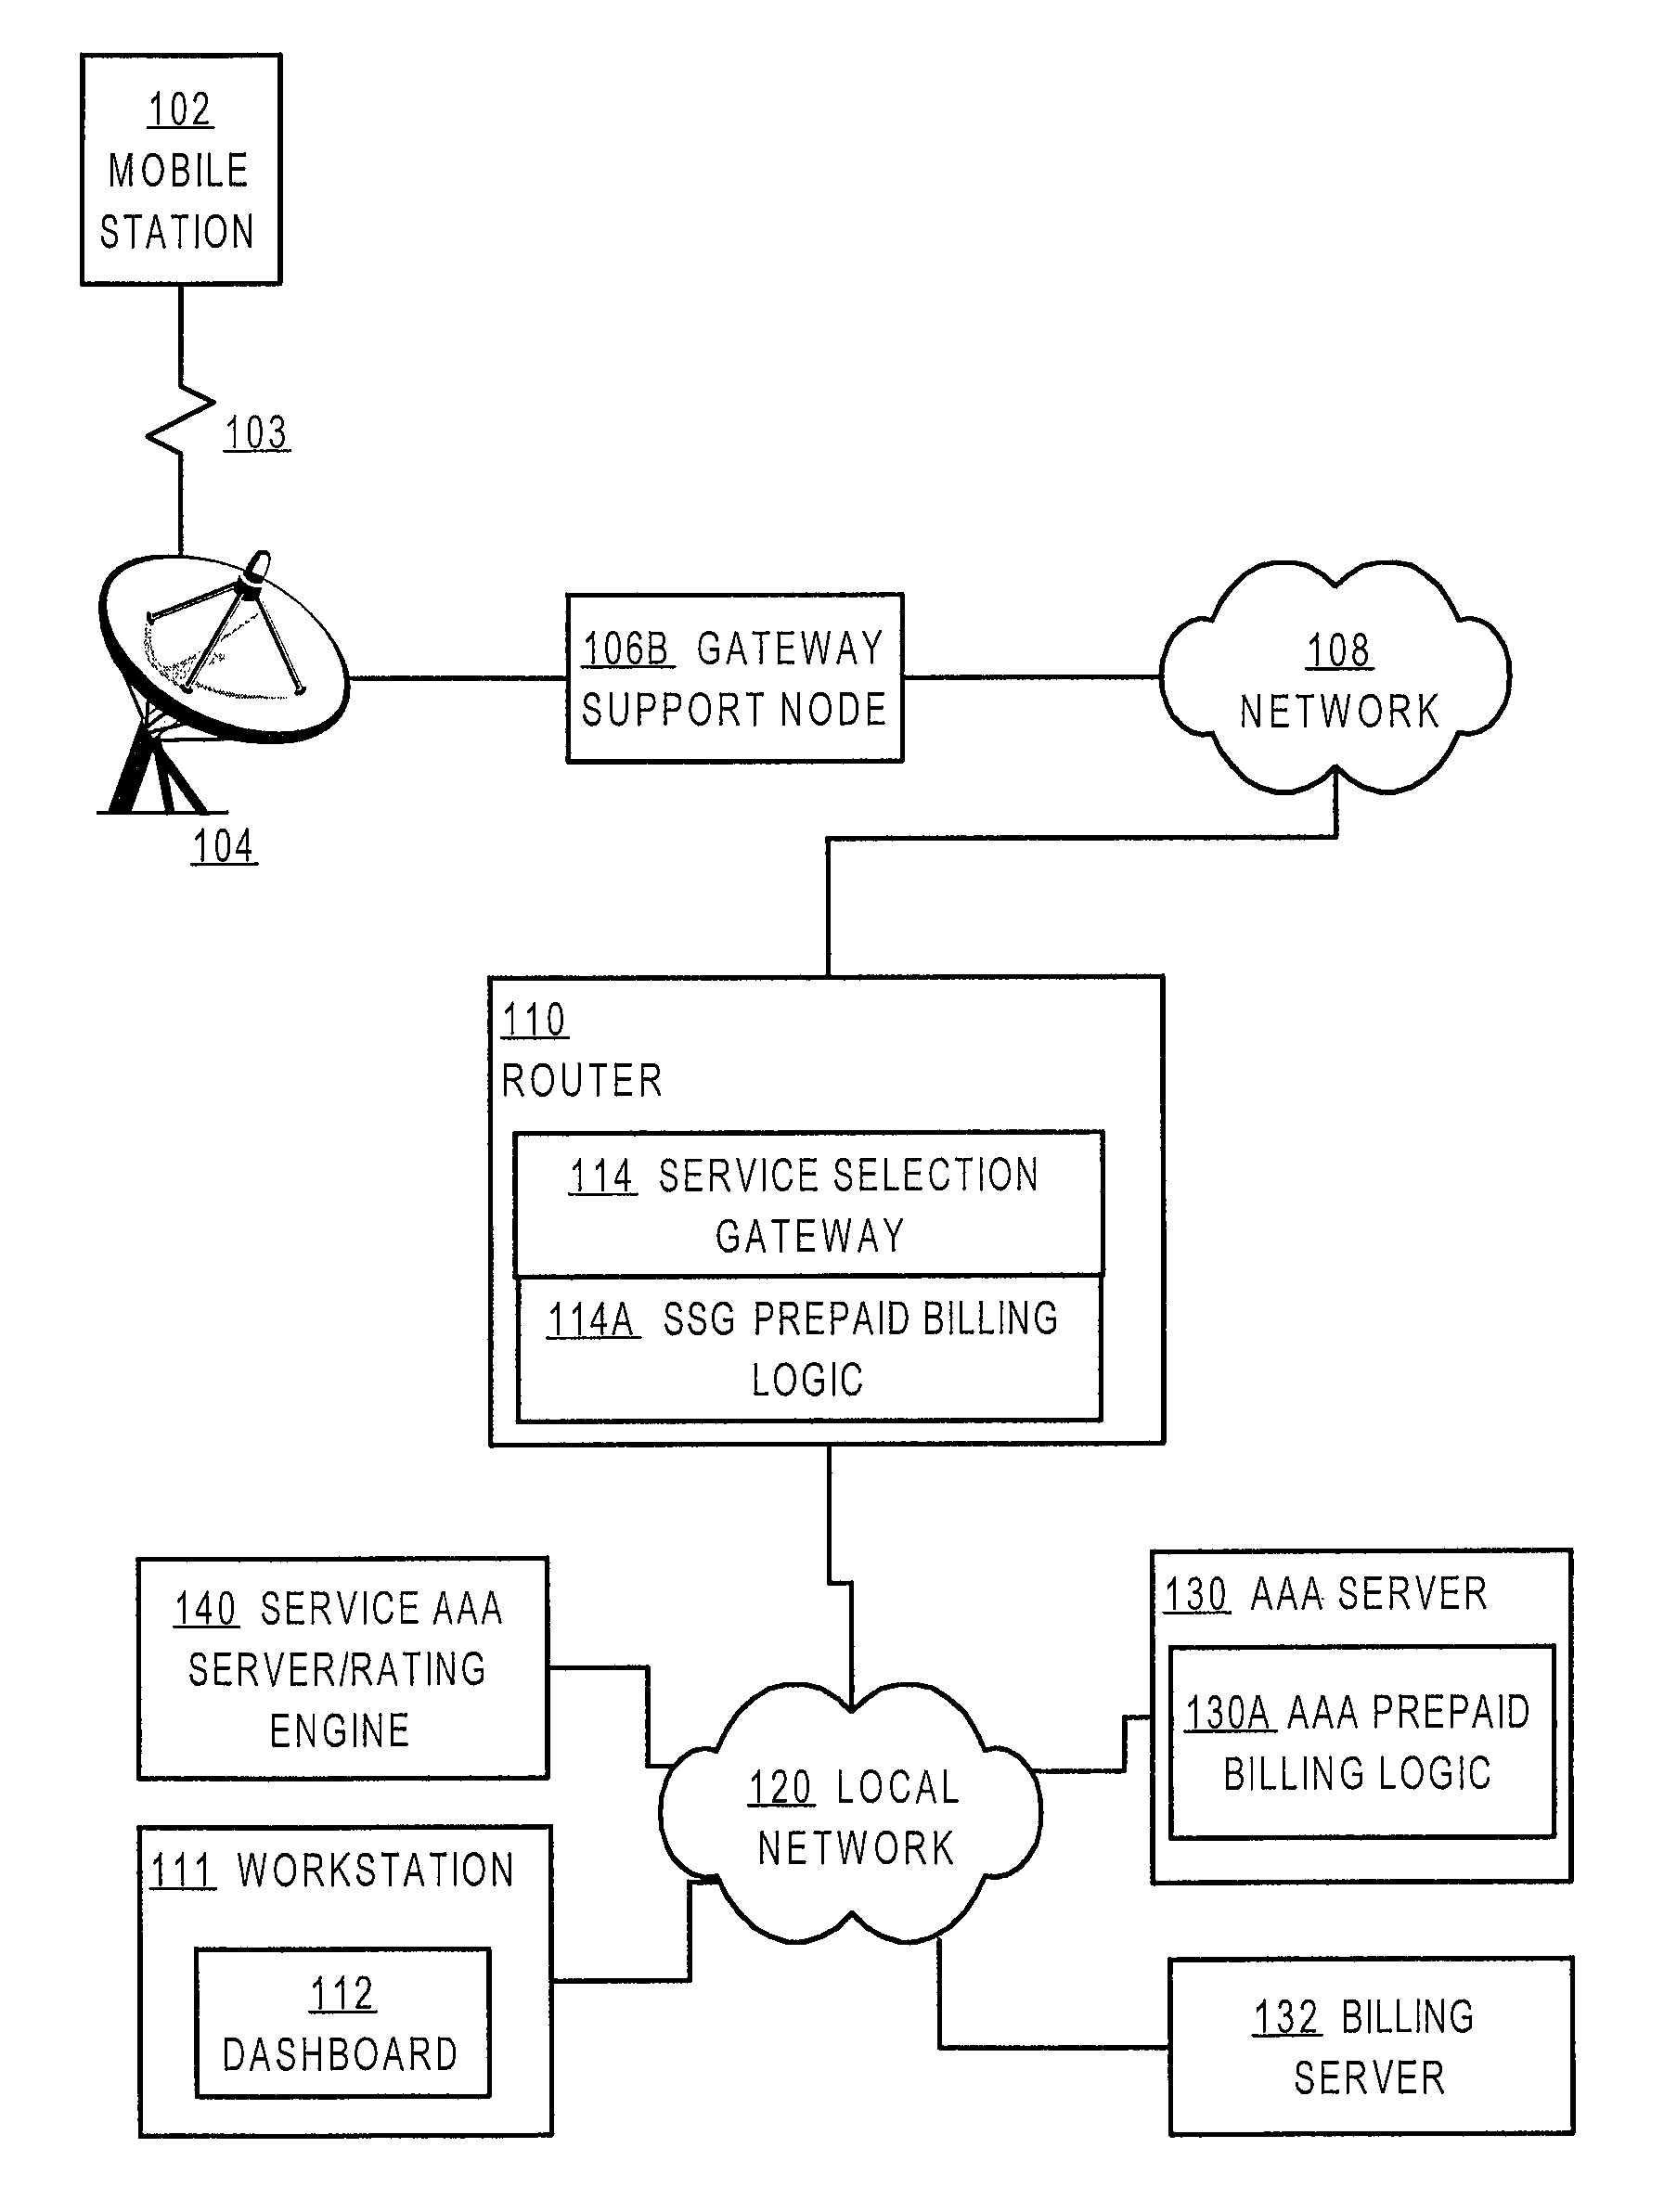 Method and apparatus providing prepaid billing for network services using explicit service authorization in an access server